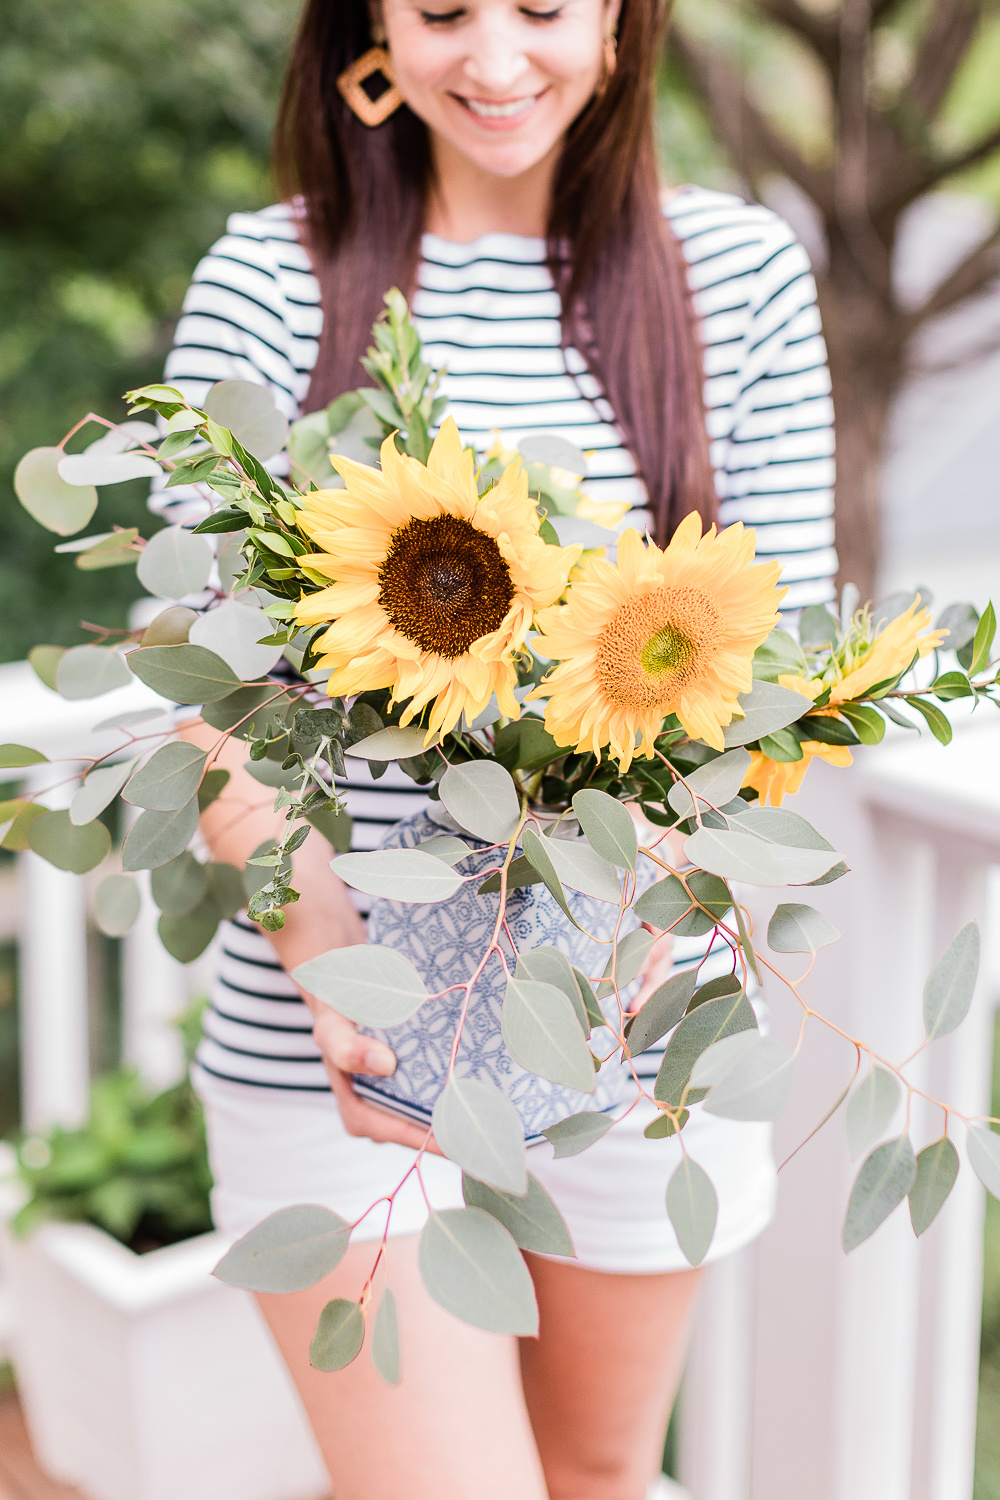 Sunflower eucalyptus centerpiece, Best of August: The Top 10 Things I Loved in August 2019 by popular Missouri blogger Stephanie Ziajka on Diary of a Debutante